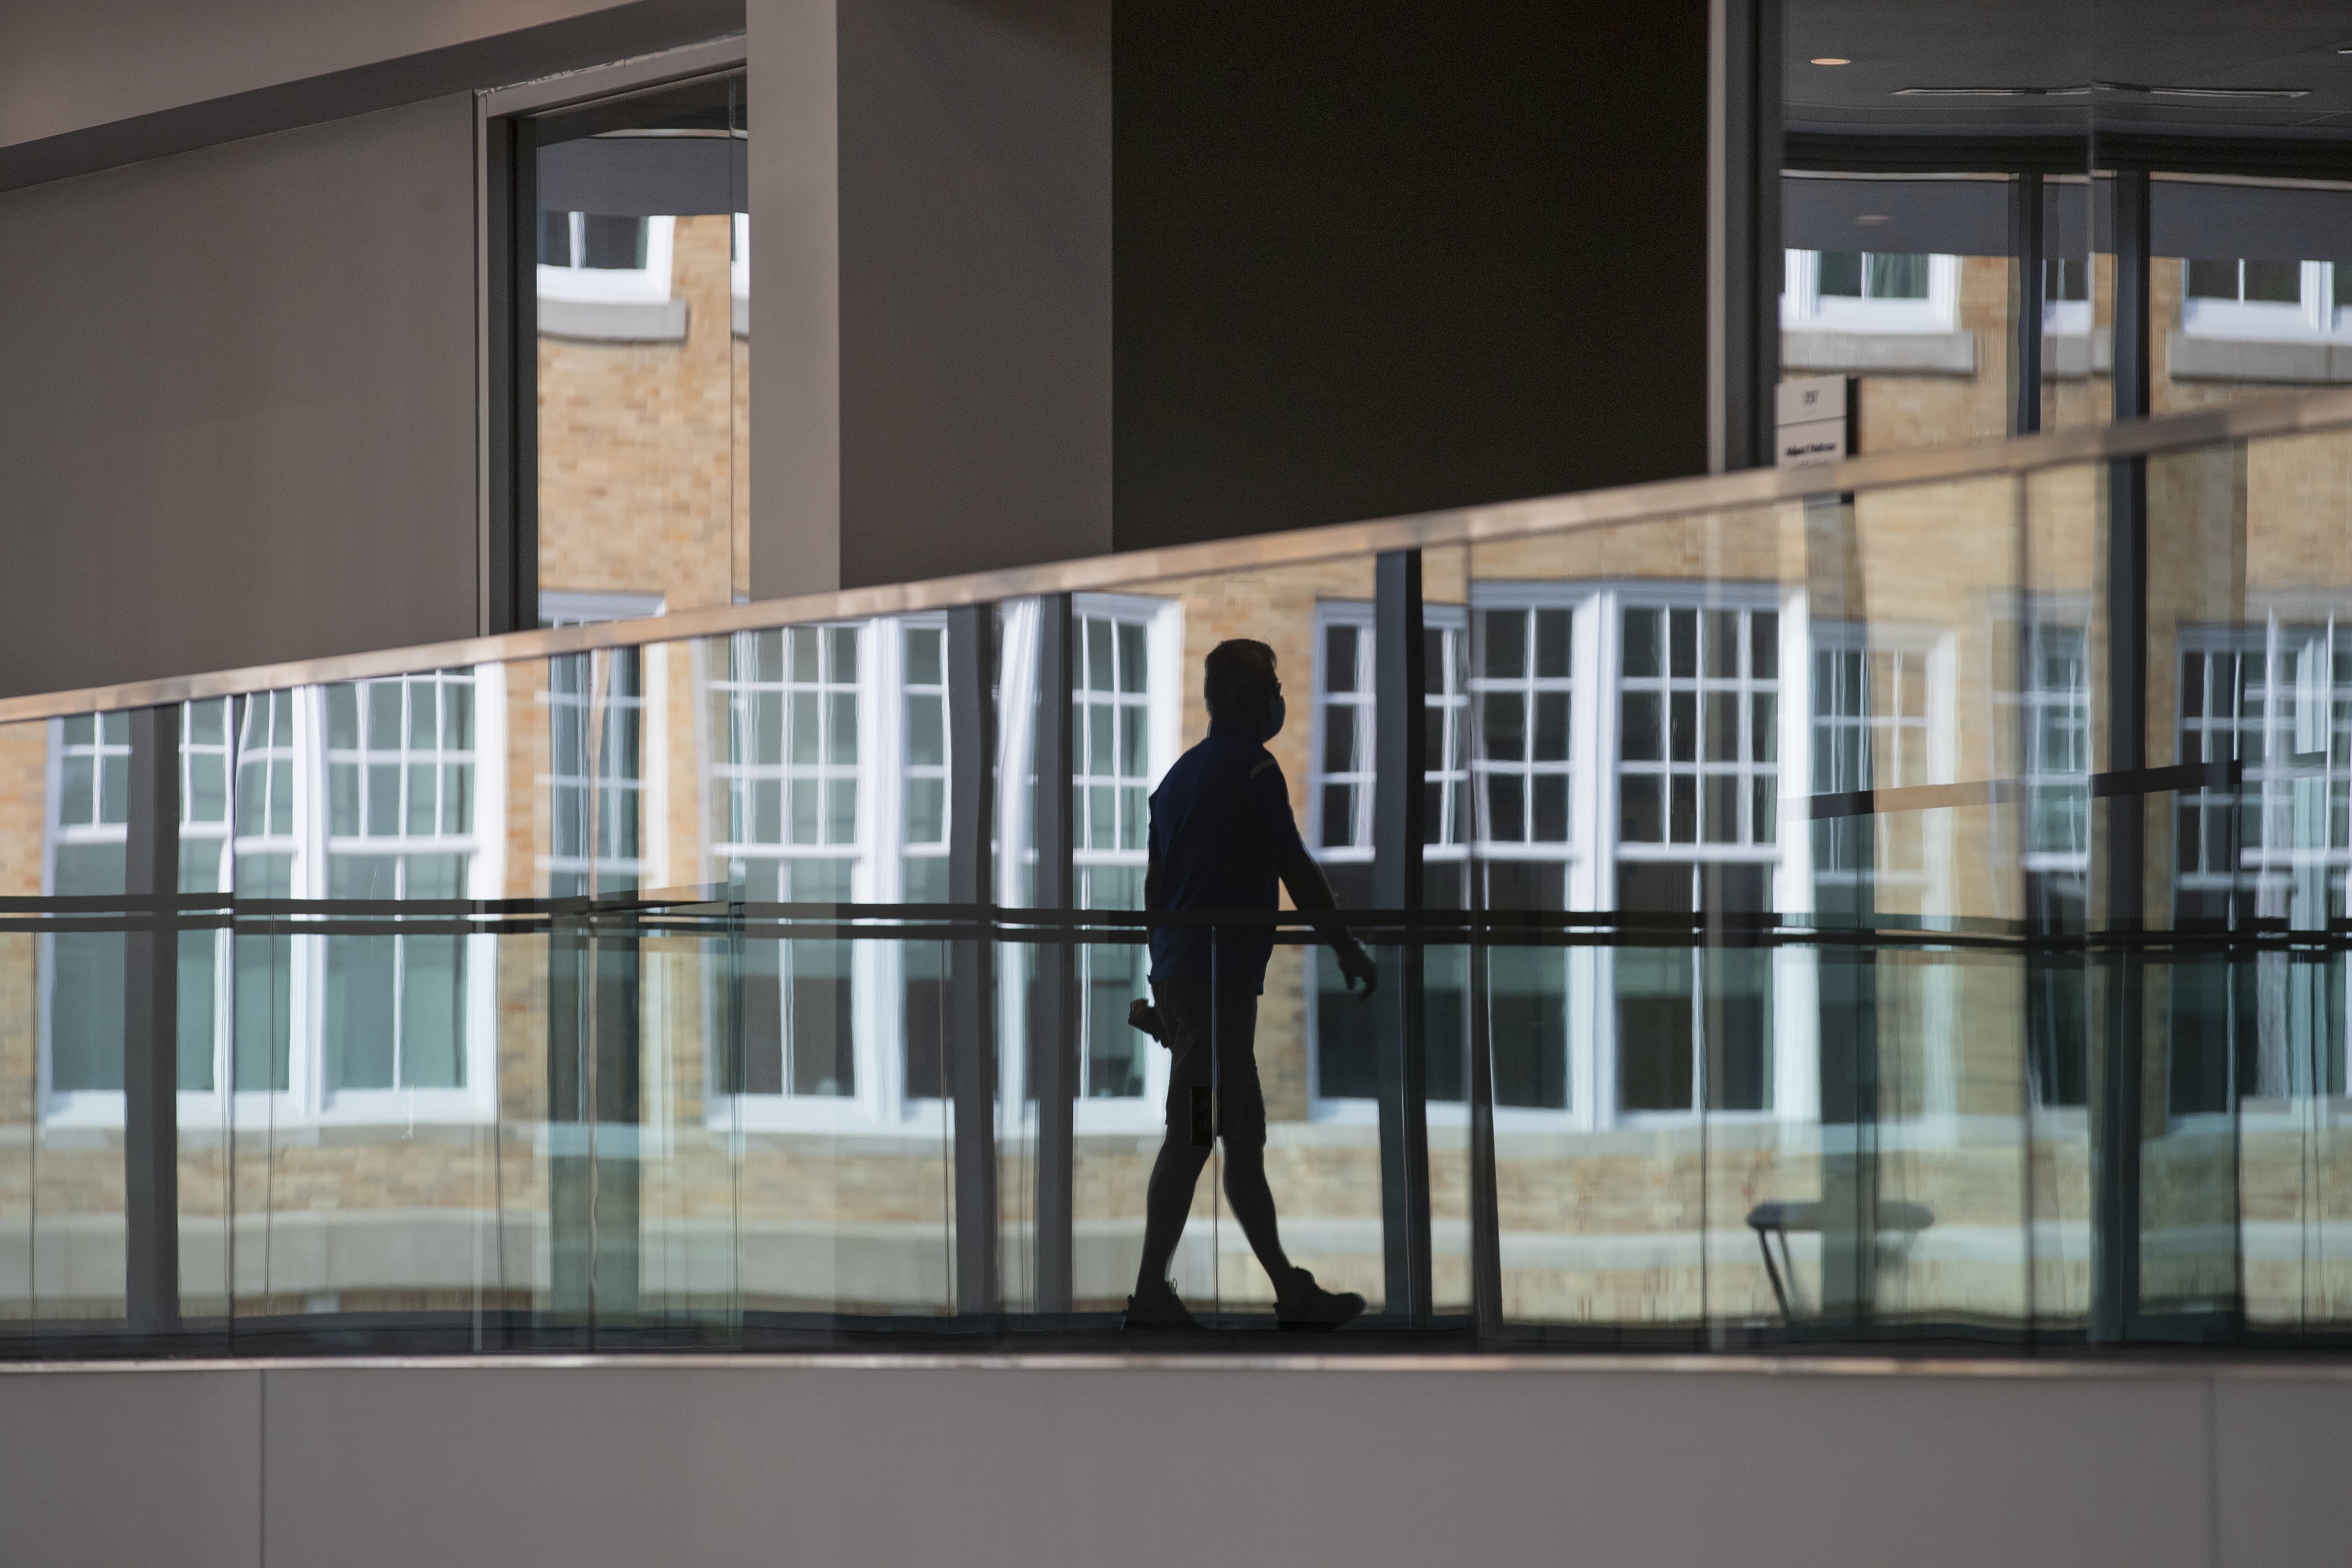 A Schmidthorst College of Business faculty member is reflected in the balcony glass as he walks through the Maurer Center.